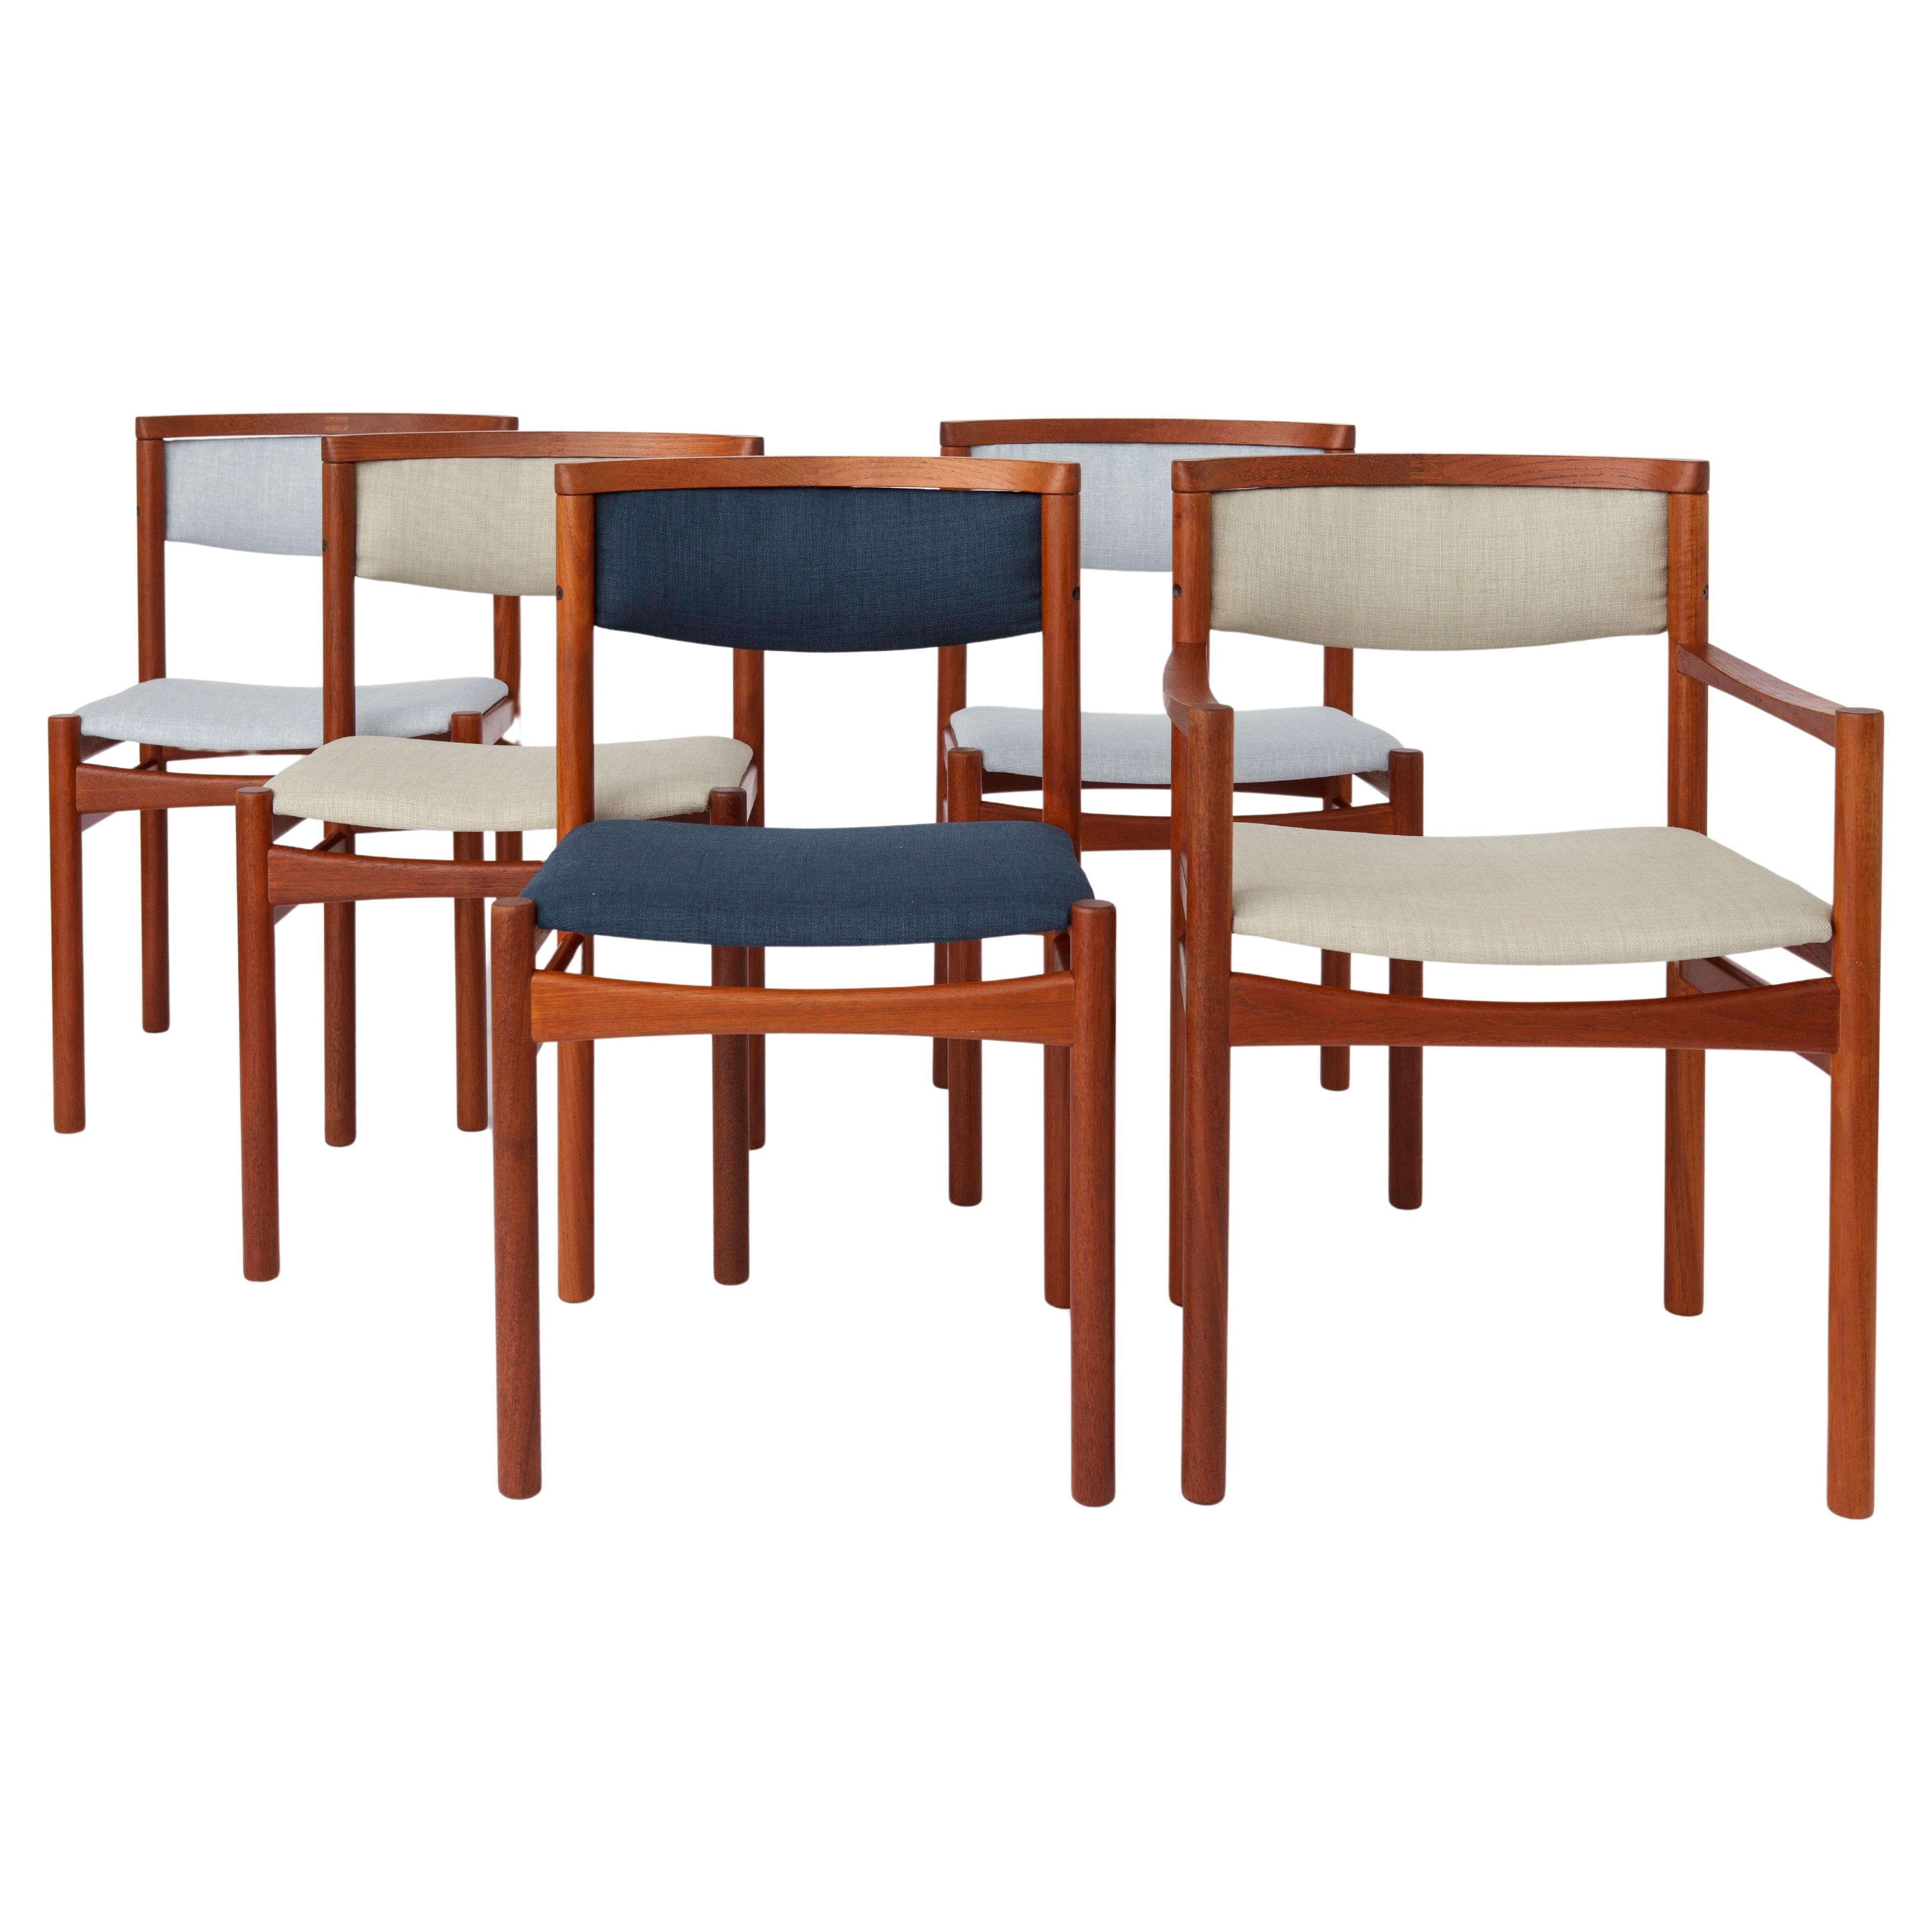 5 Dining Chairs 1960s by SAX, Denmark Teak For Sale